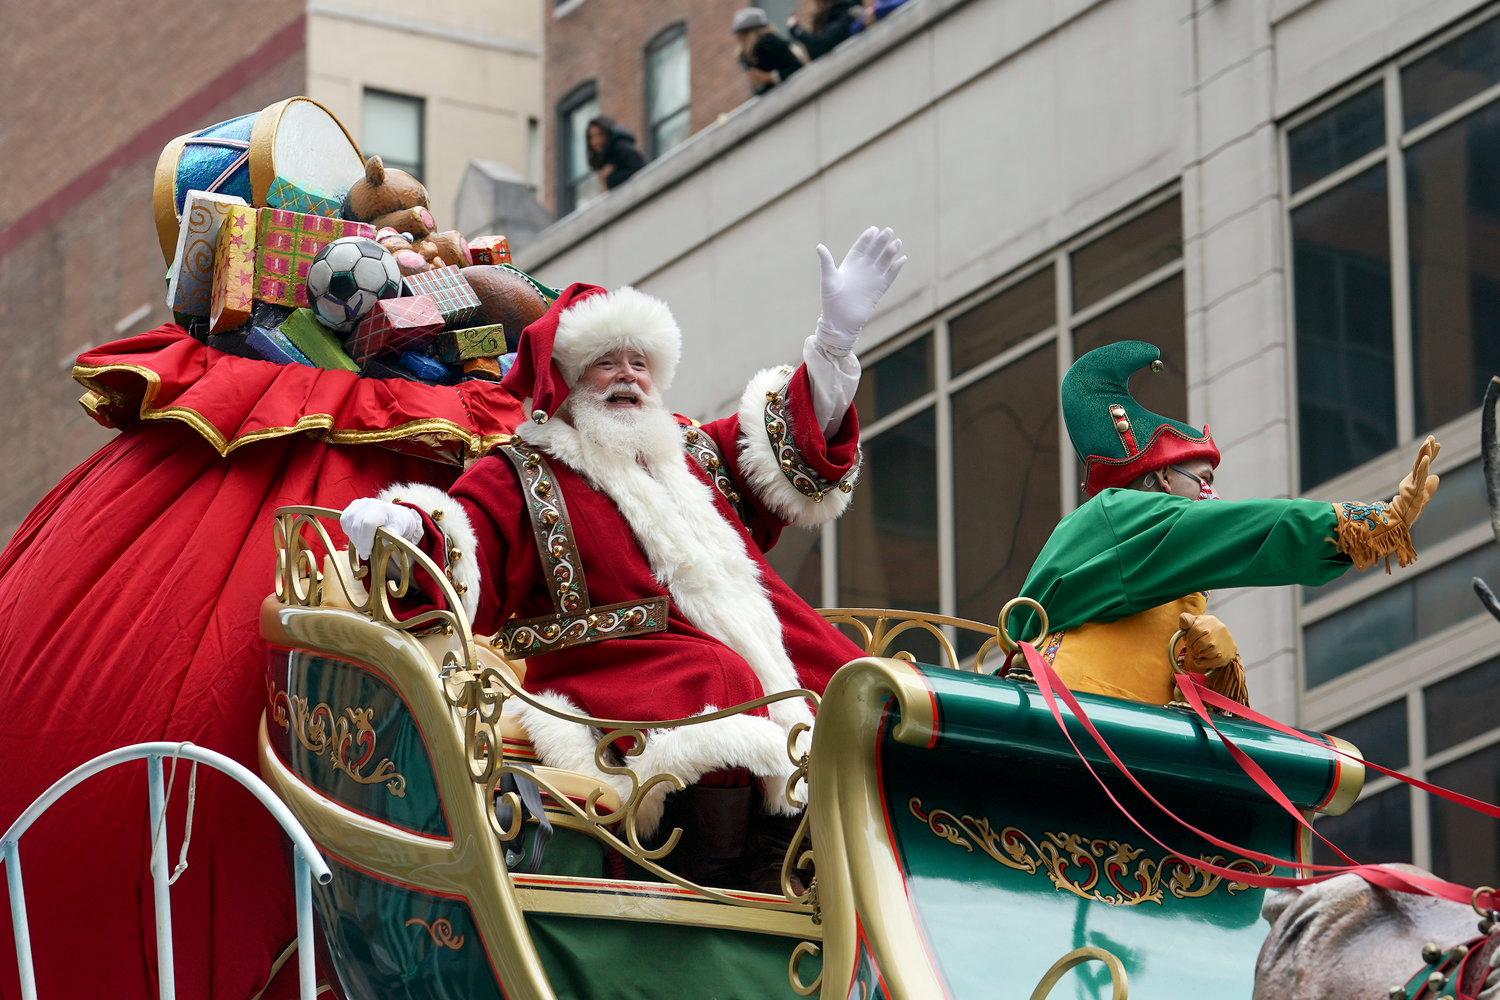 GUEST OF HONOR — Santa Claus waves from atop a float while riding along 6th Ave. during the Macy’s Thanksgiving Day Parade Thursday in New York.